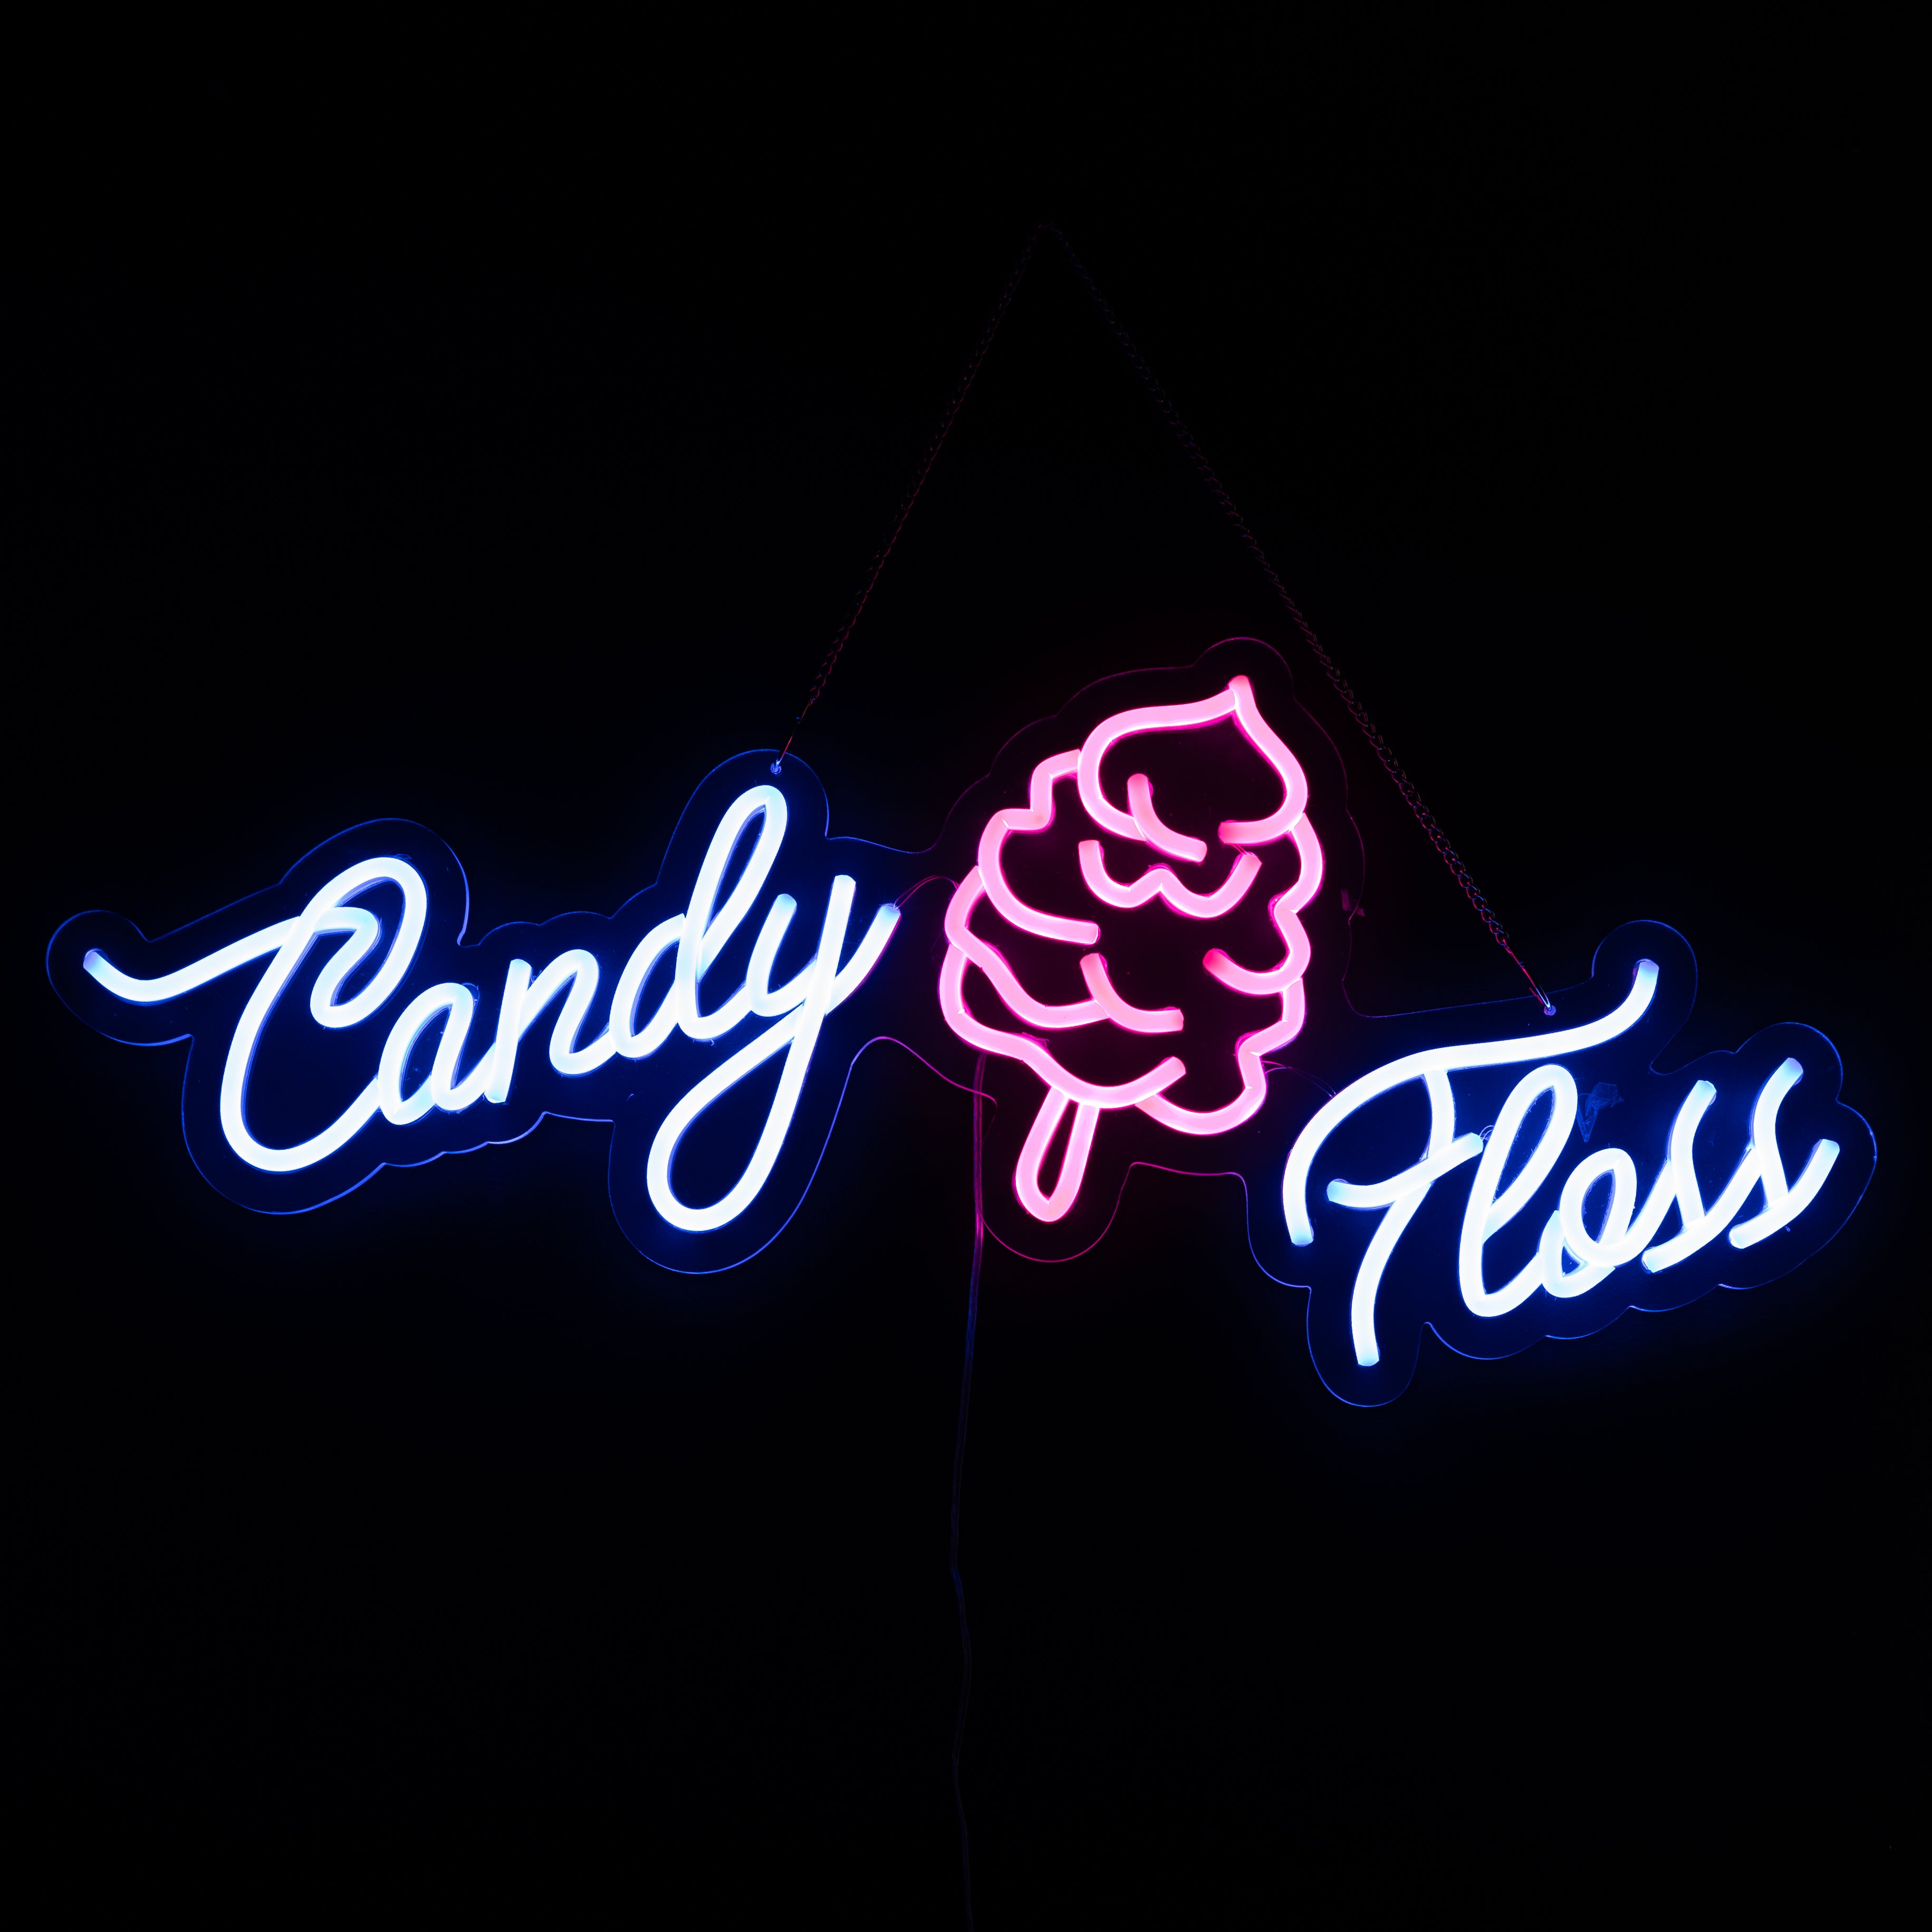 Candy floss Neon style LED light up sign